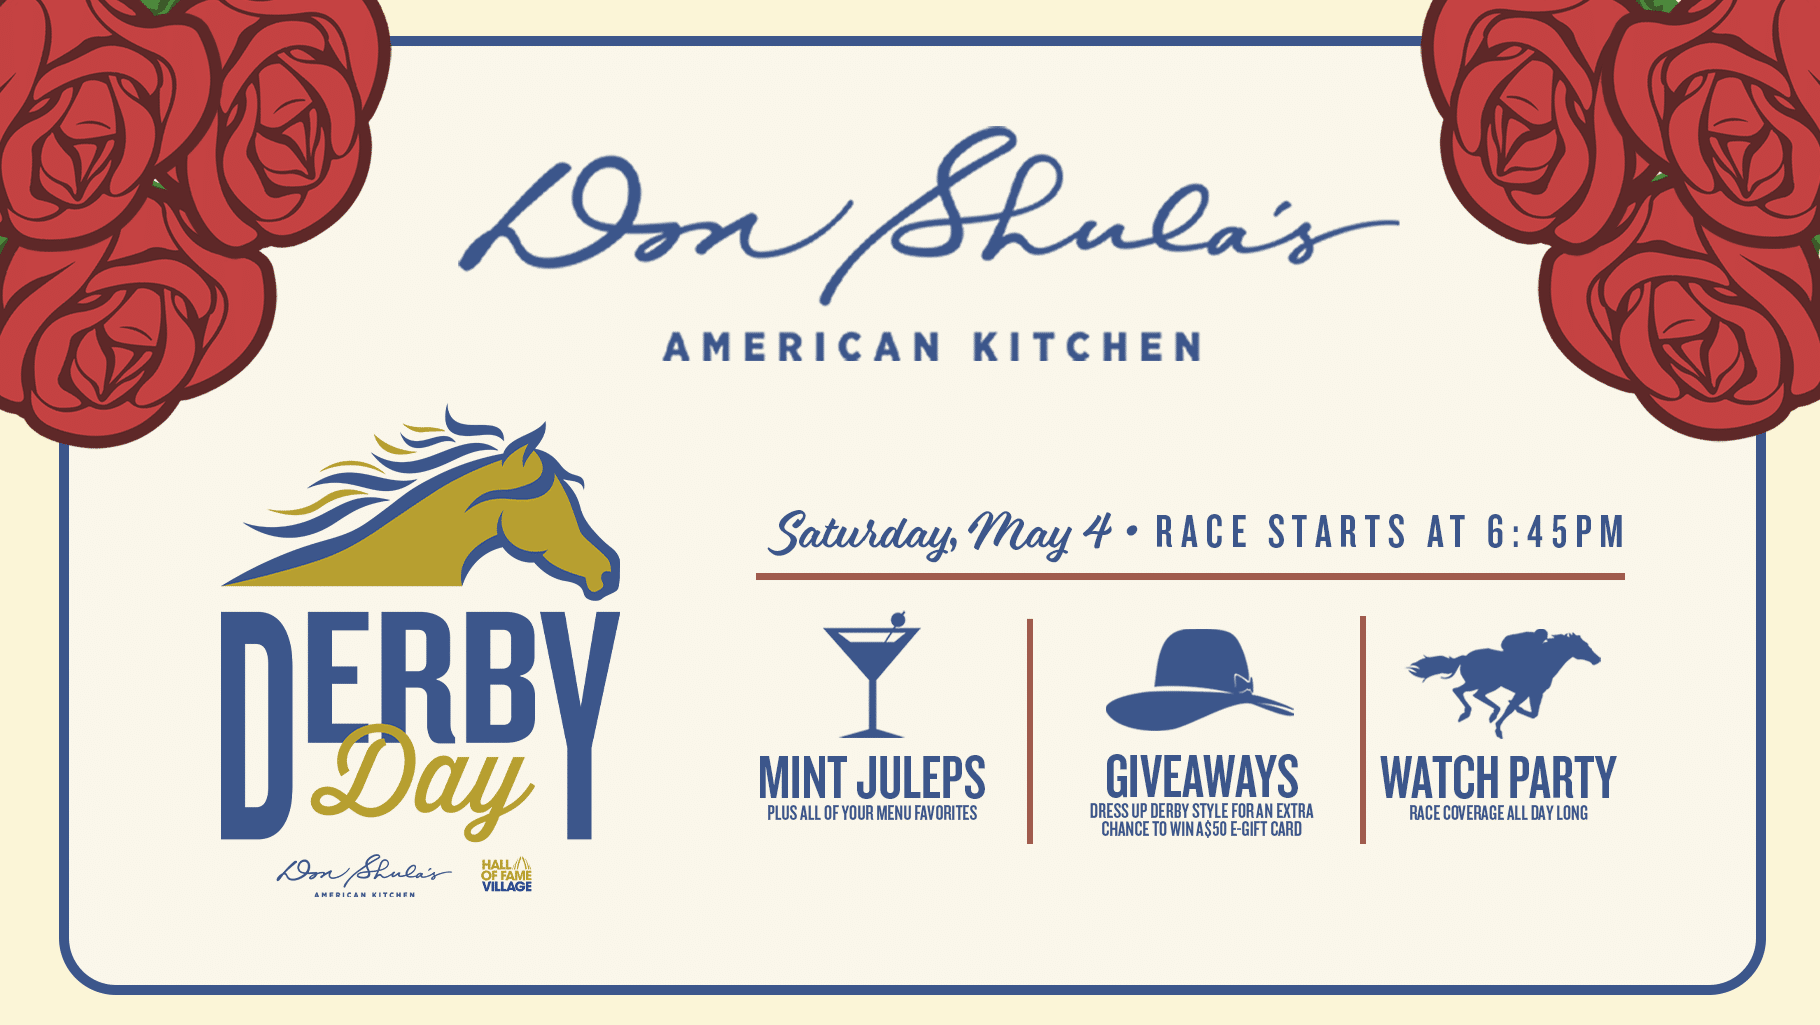 Don Shula's American Kitchen Derby Day Promo